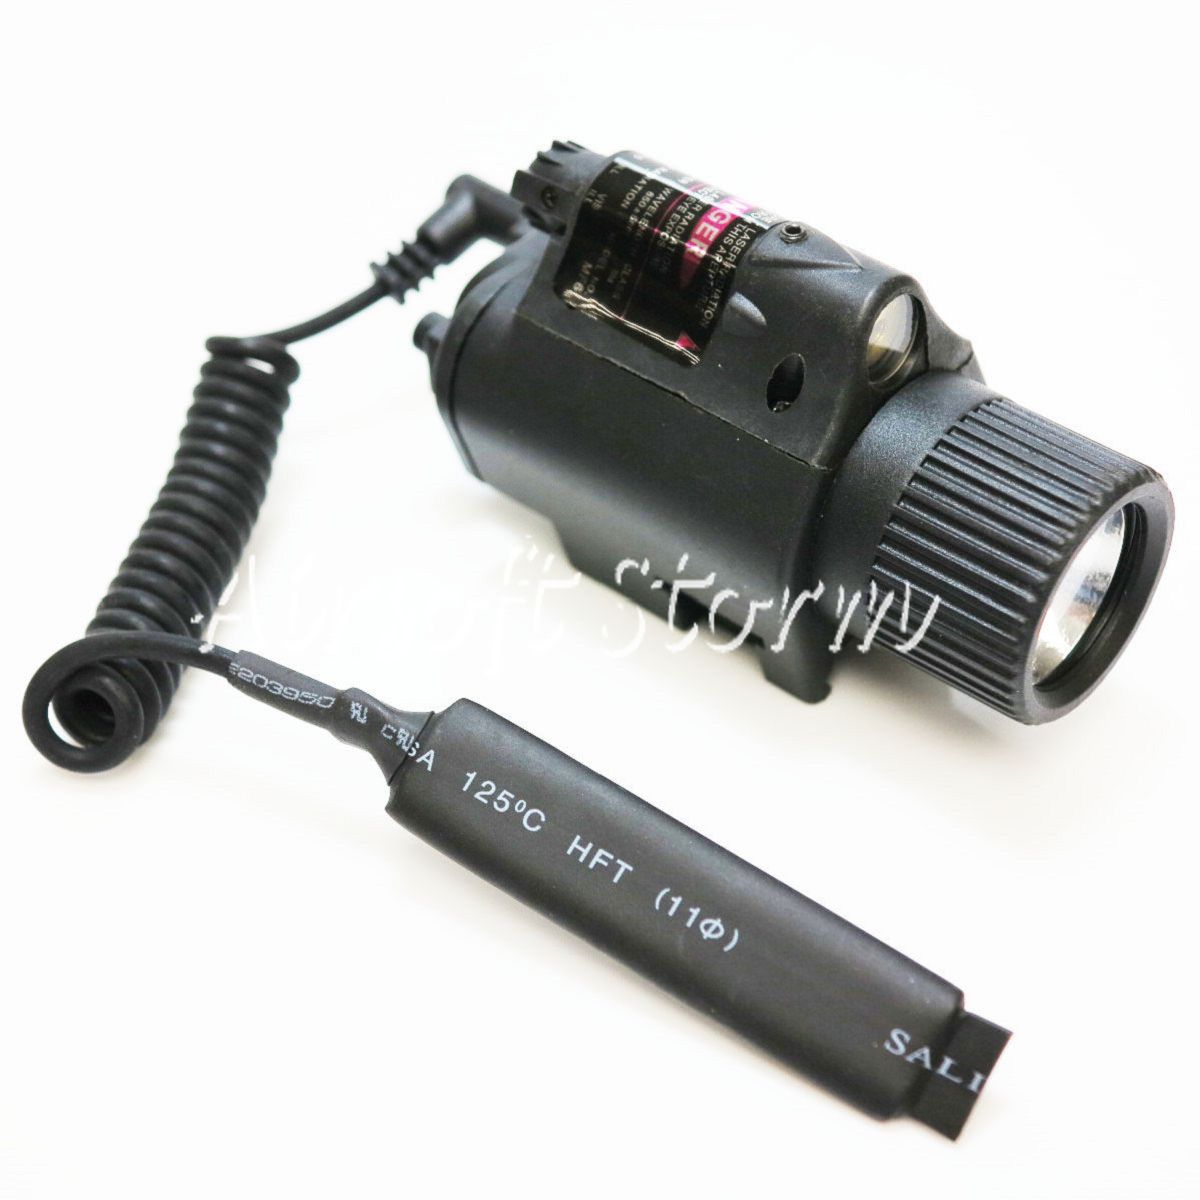 AEG Shooting Gear 2in1 65Lm Xenon Tactical Flashlight & Red Laser